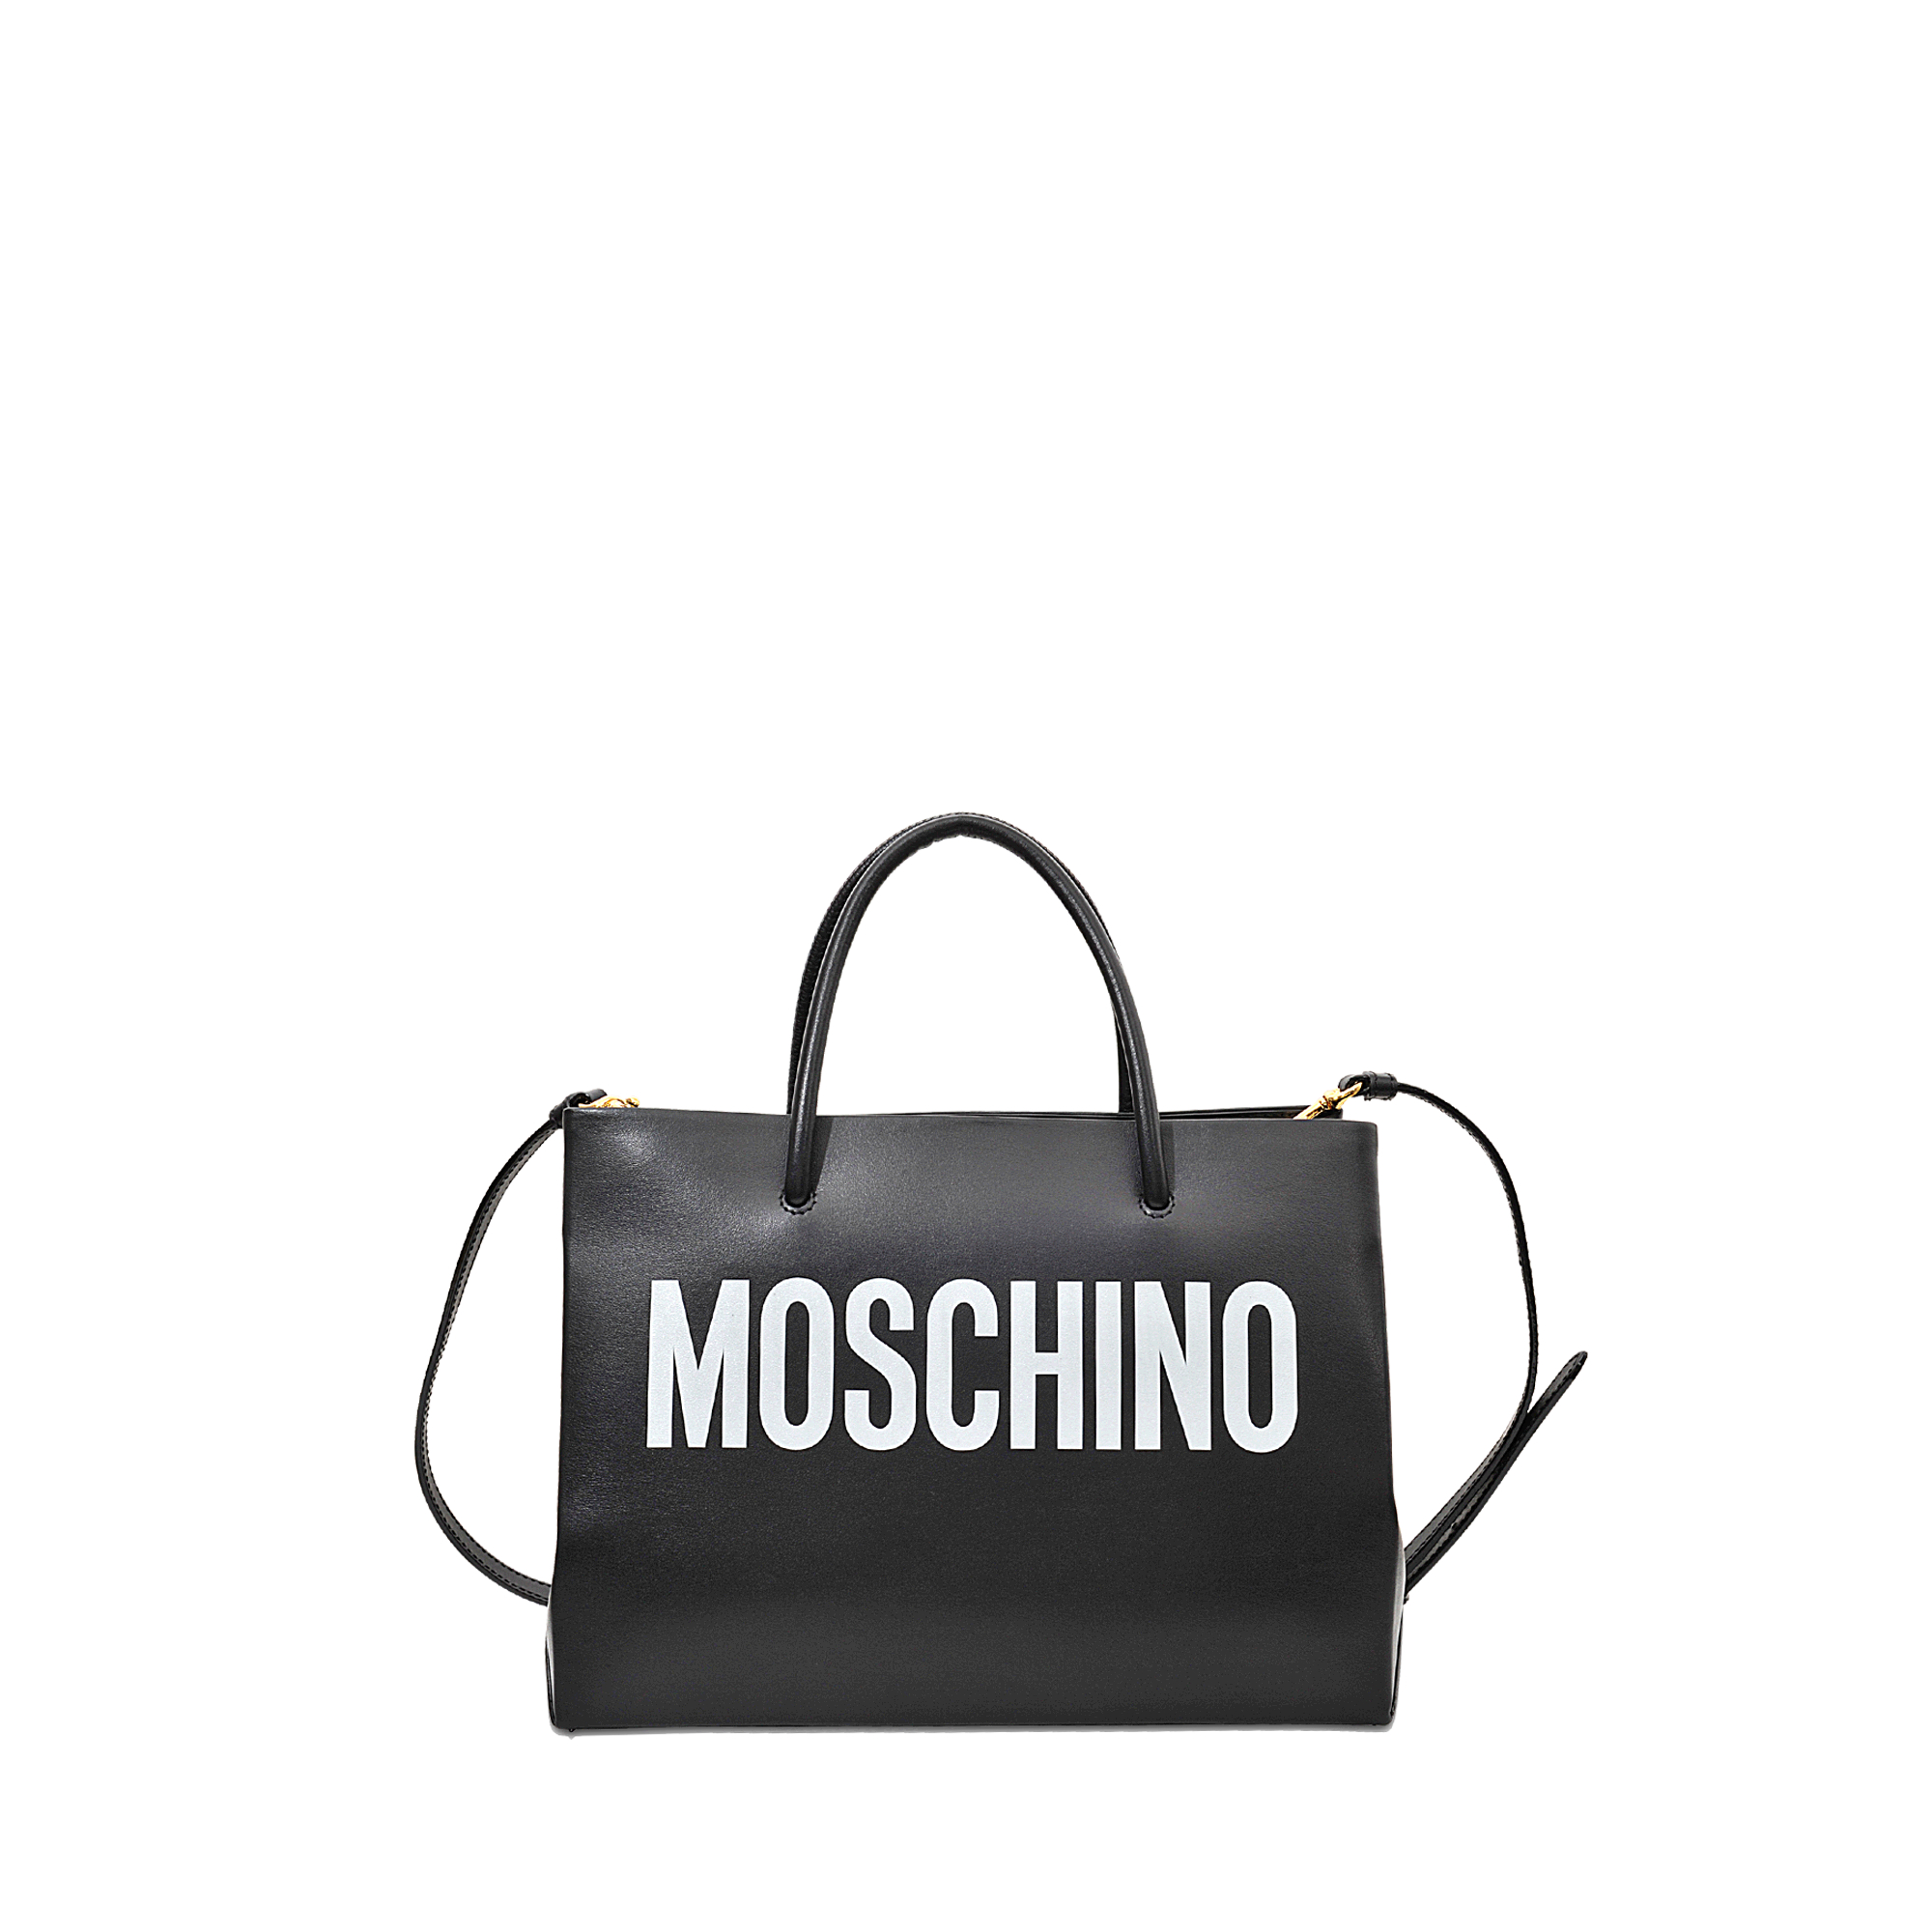 Moschino Small Shopping Bag in Black - Lyst